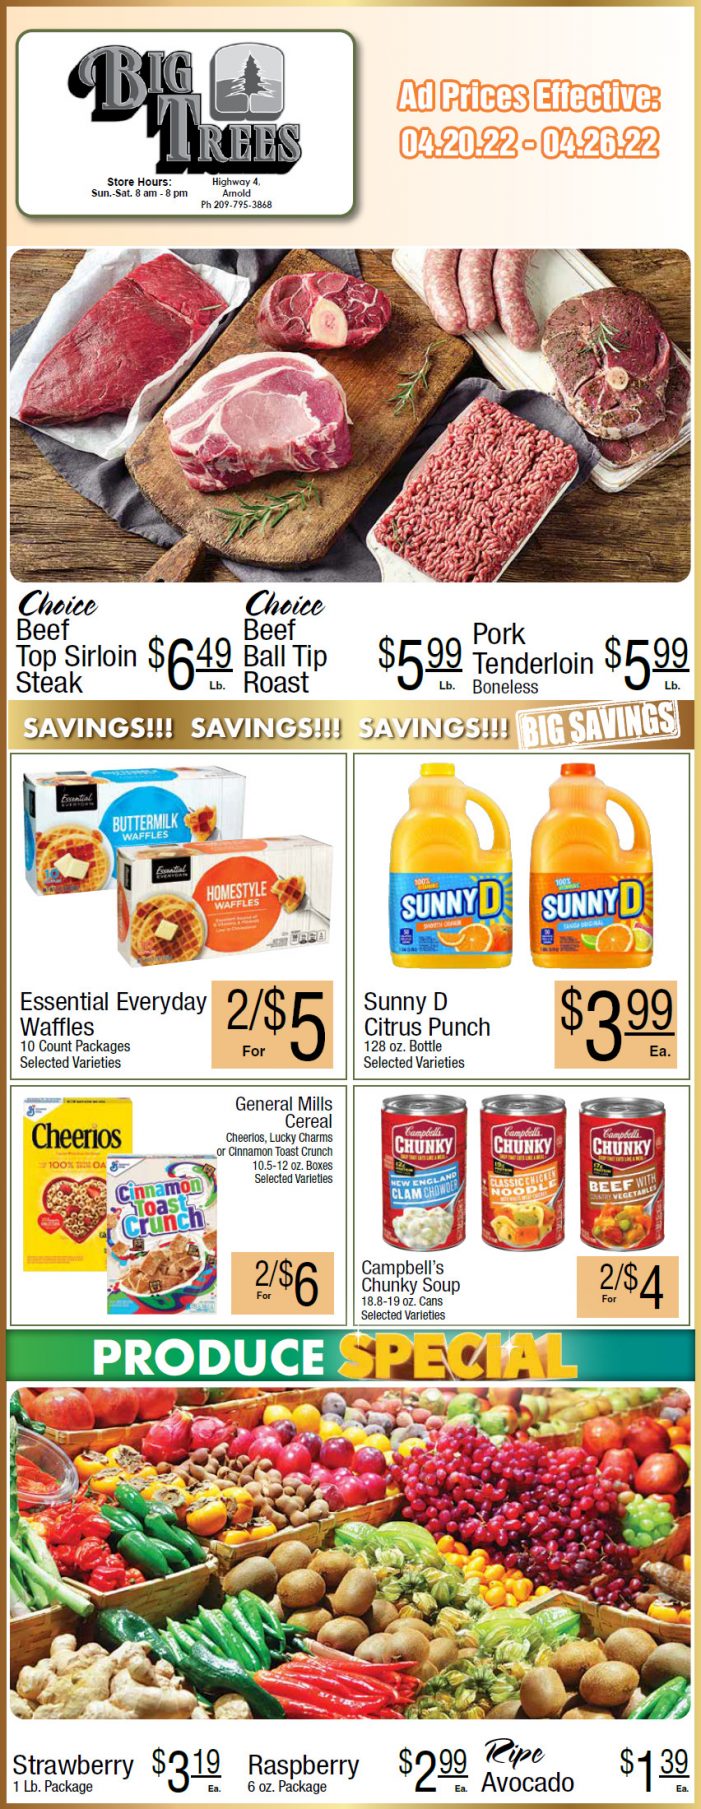 Big Trees Market Weekly Ad & Grocery Specials April 20th Through April 26th! Shop Local & Save!